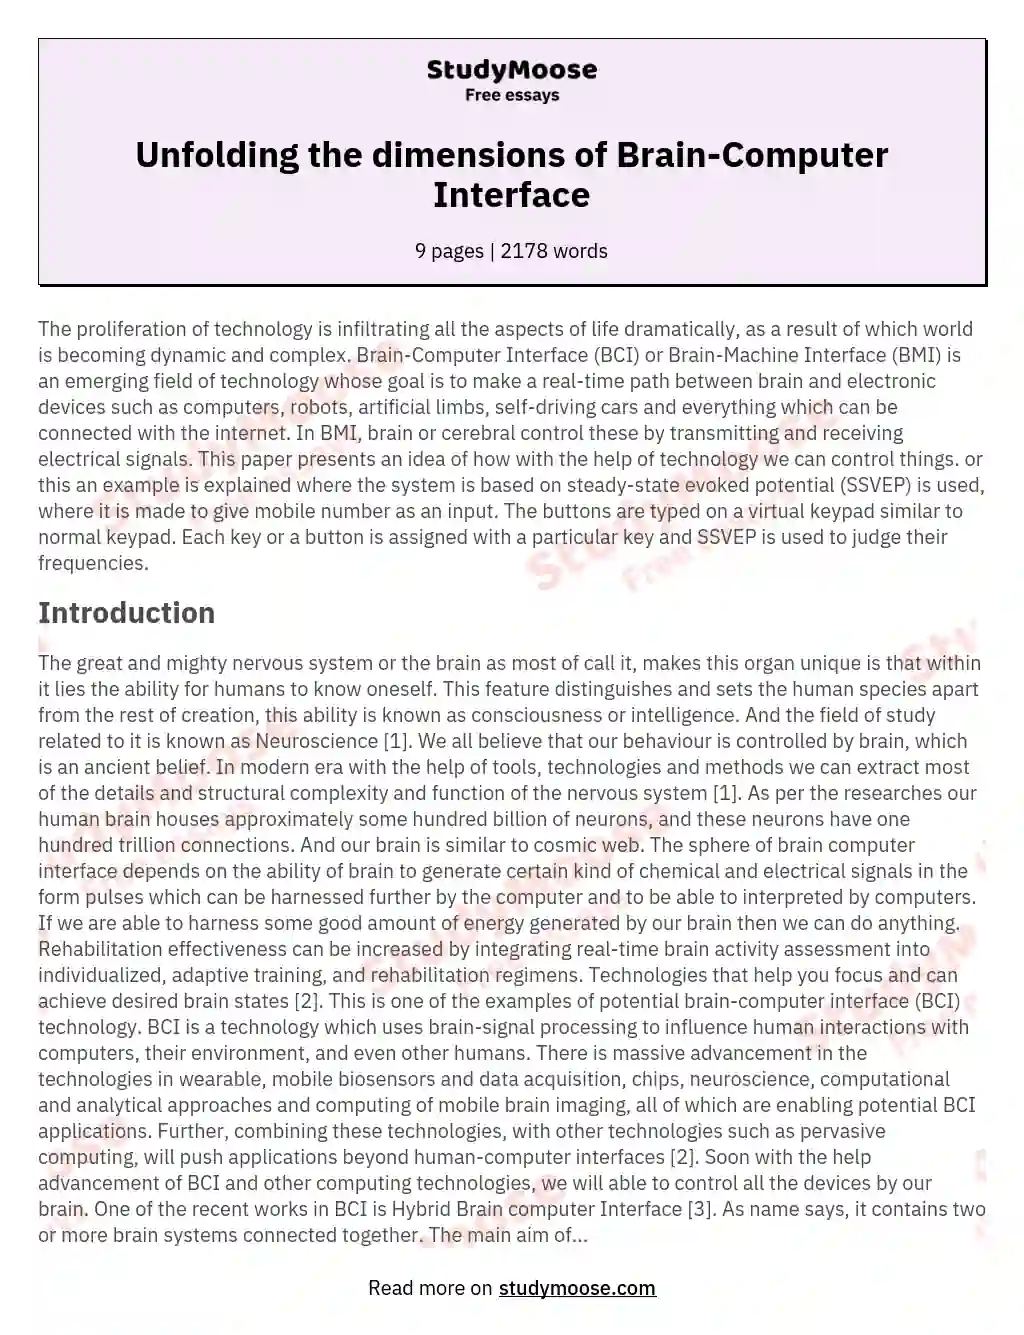 Unfolding the dimensions of Brain-Computer Interface essay